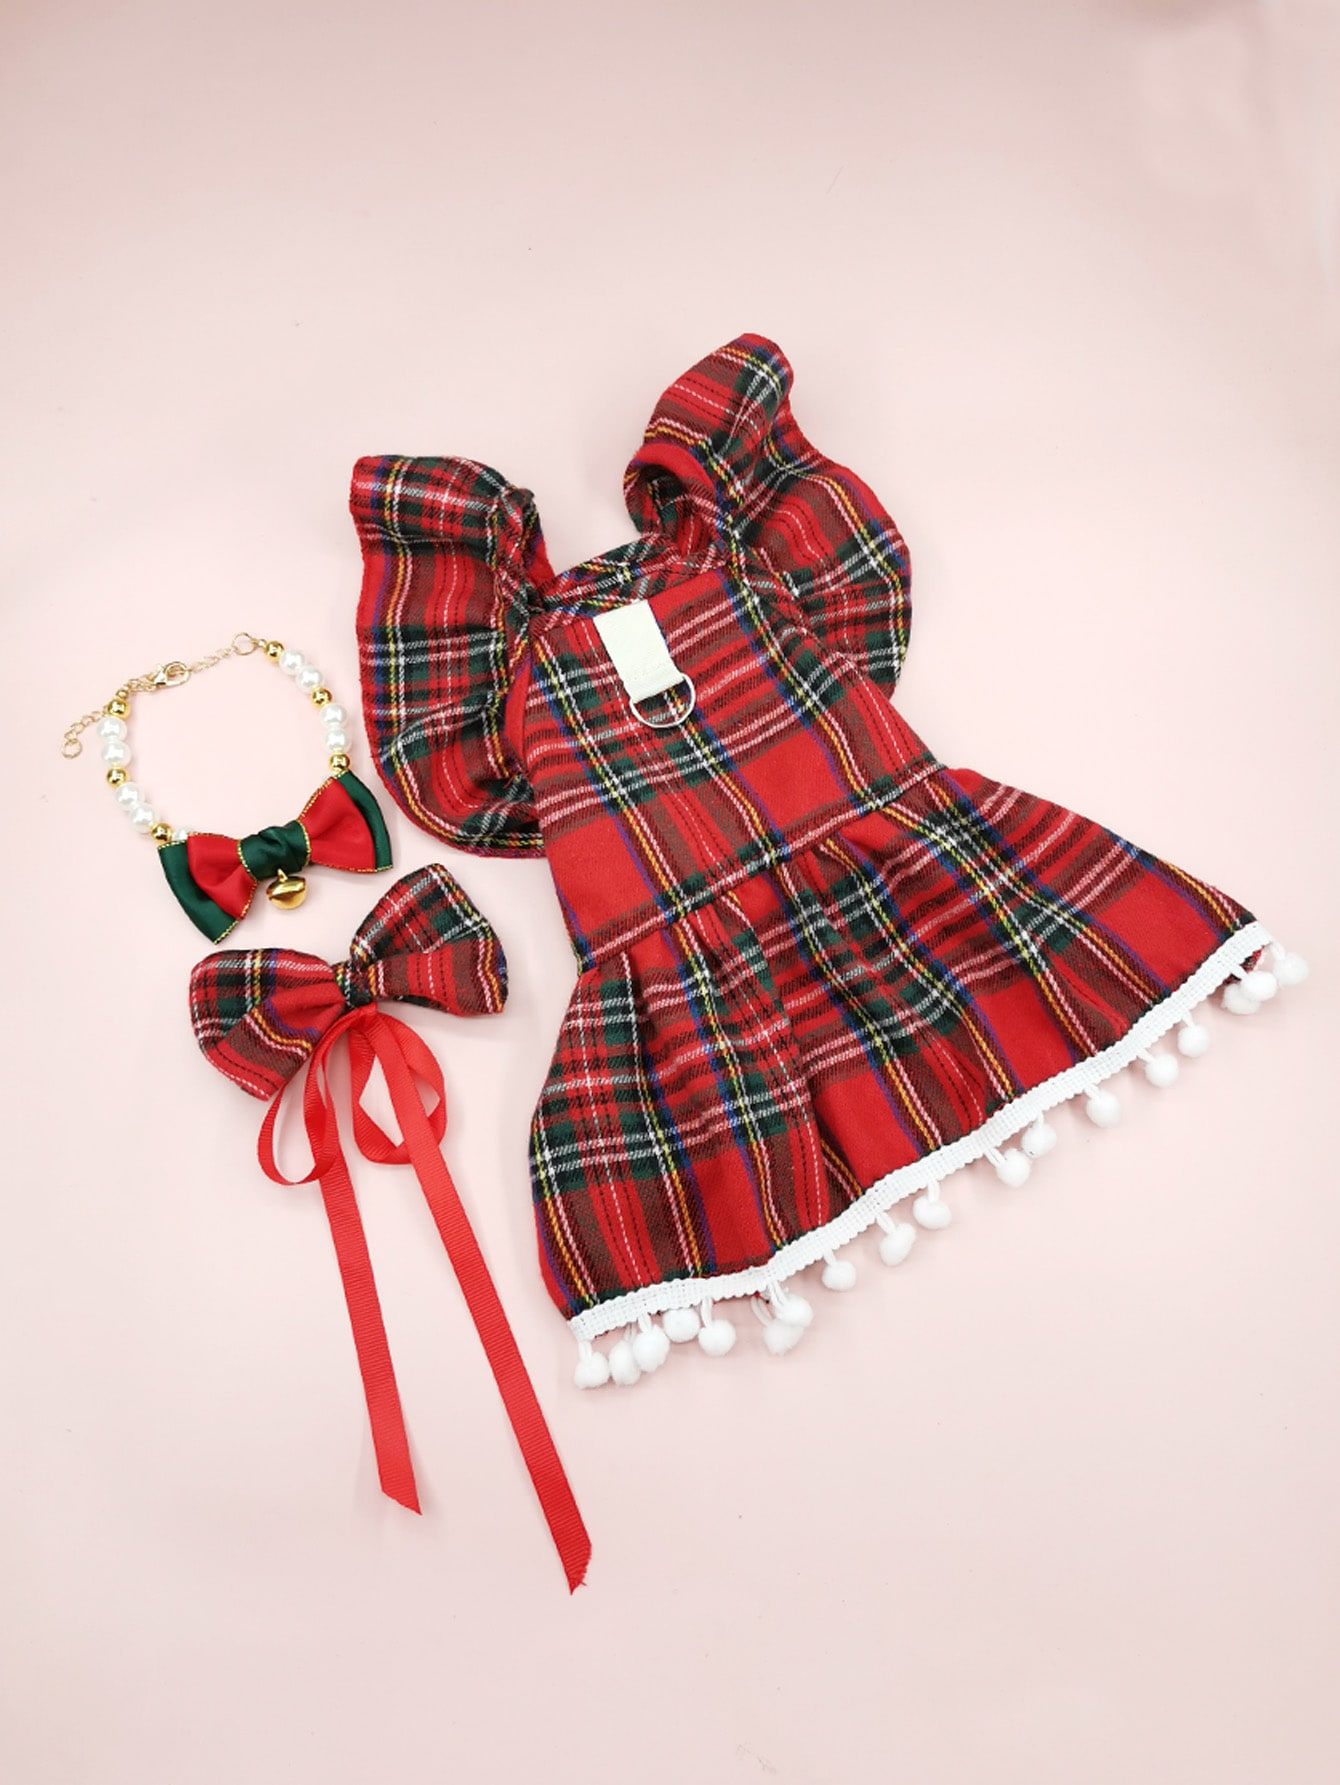 Pet Clothes Set Including Printed Dress And Bow Tie | SHEIN